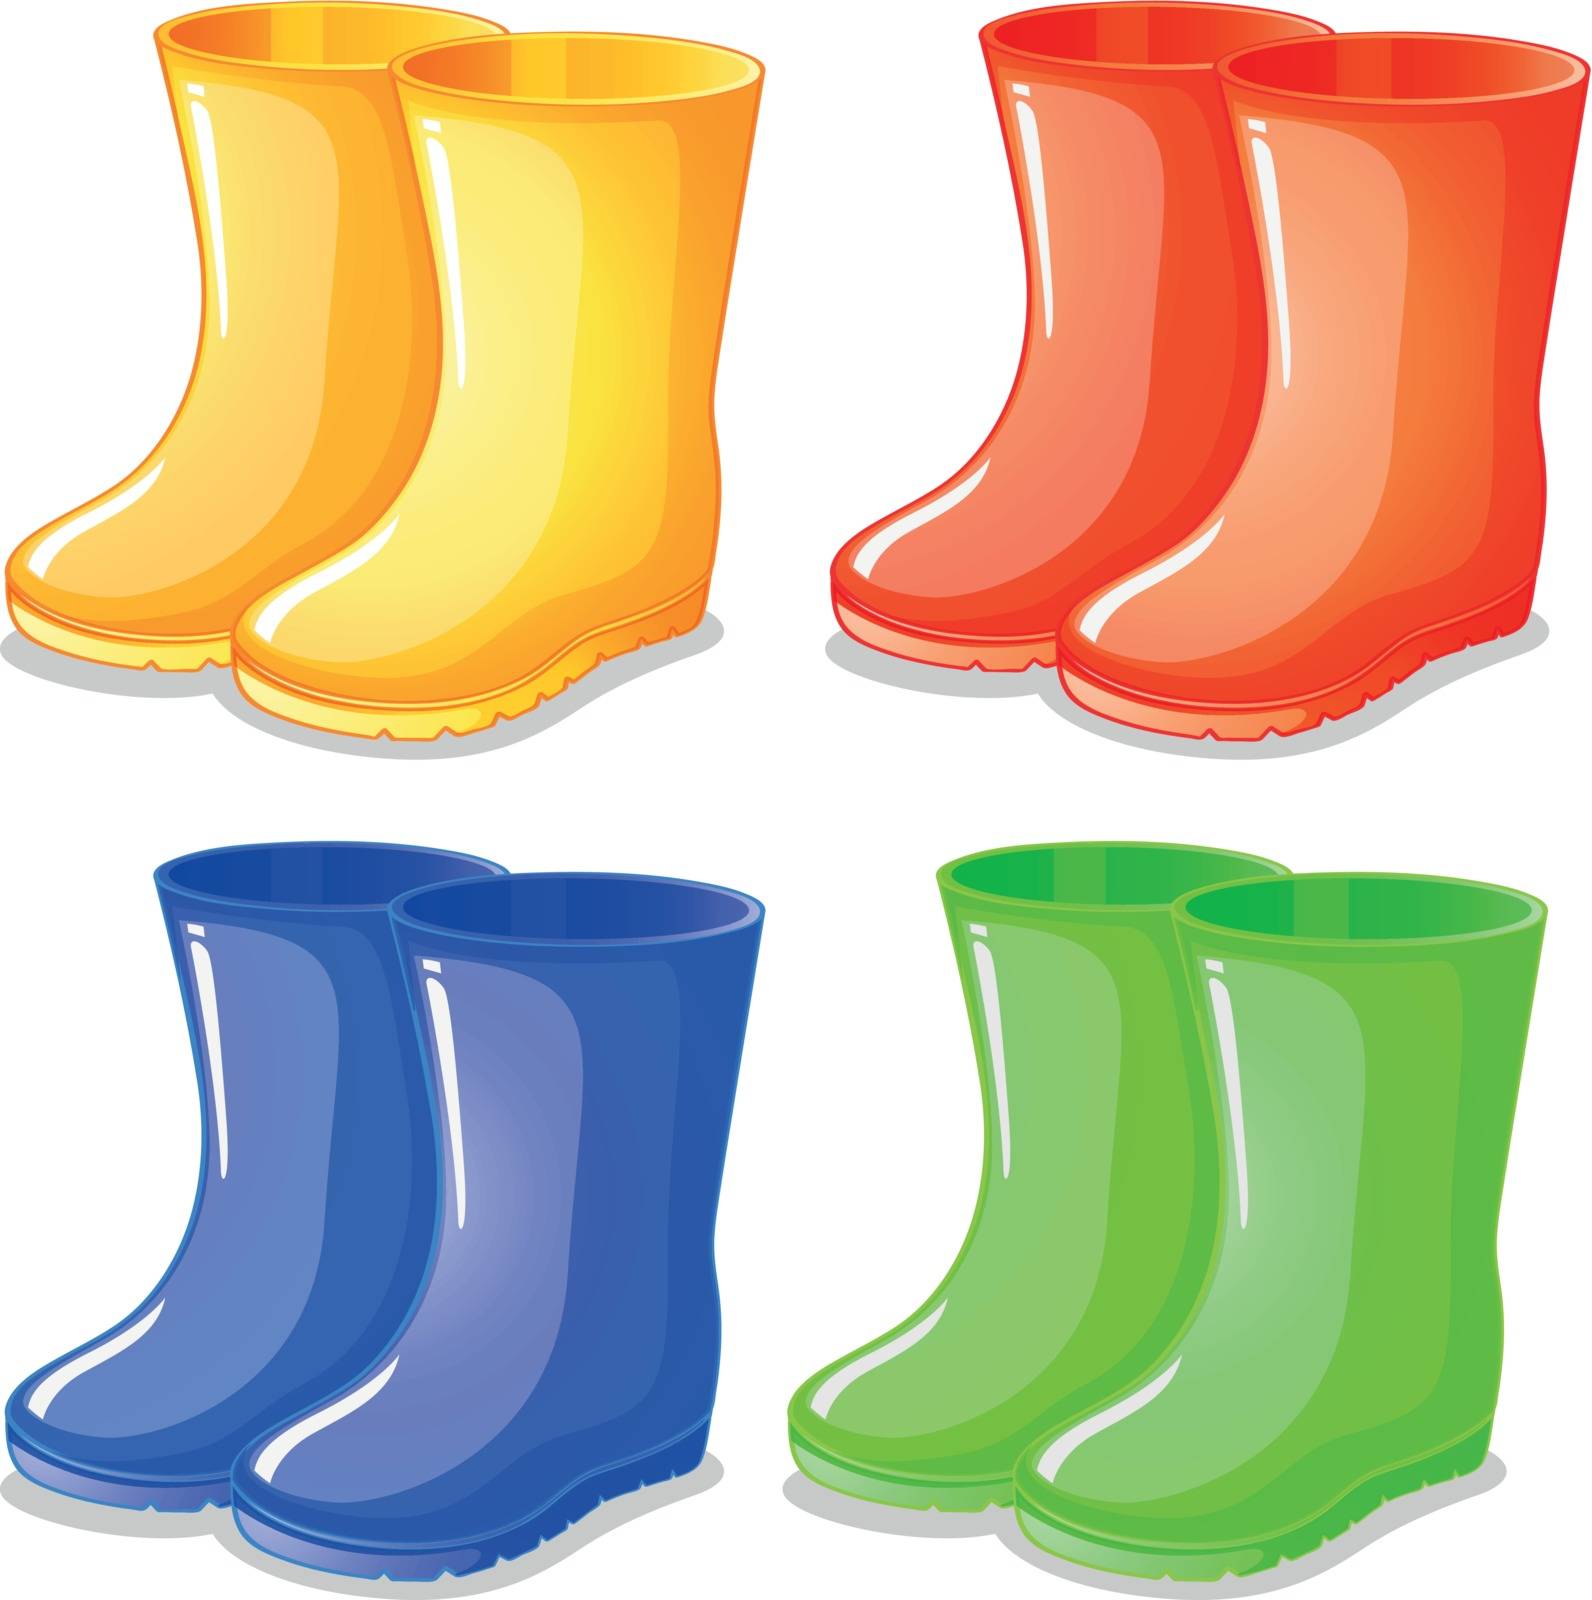 Illustration of the four boots in different colors on a white background